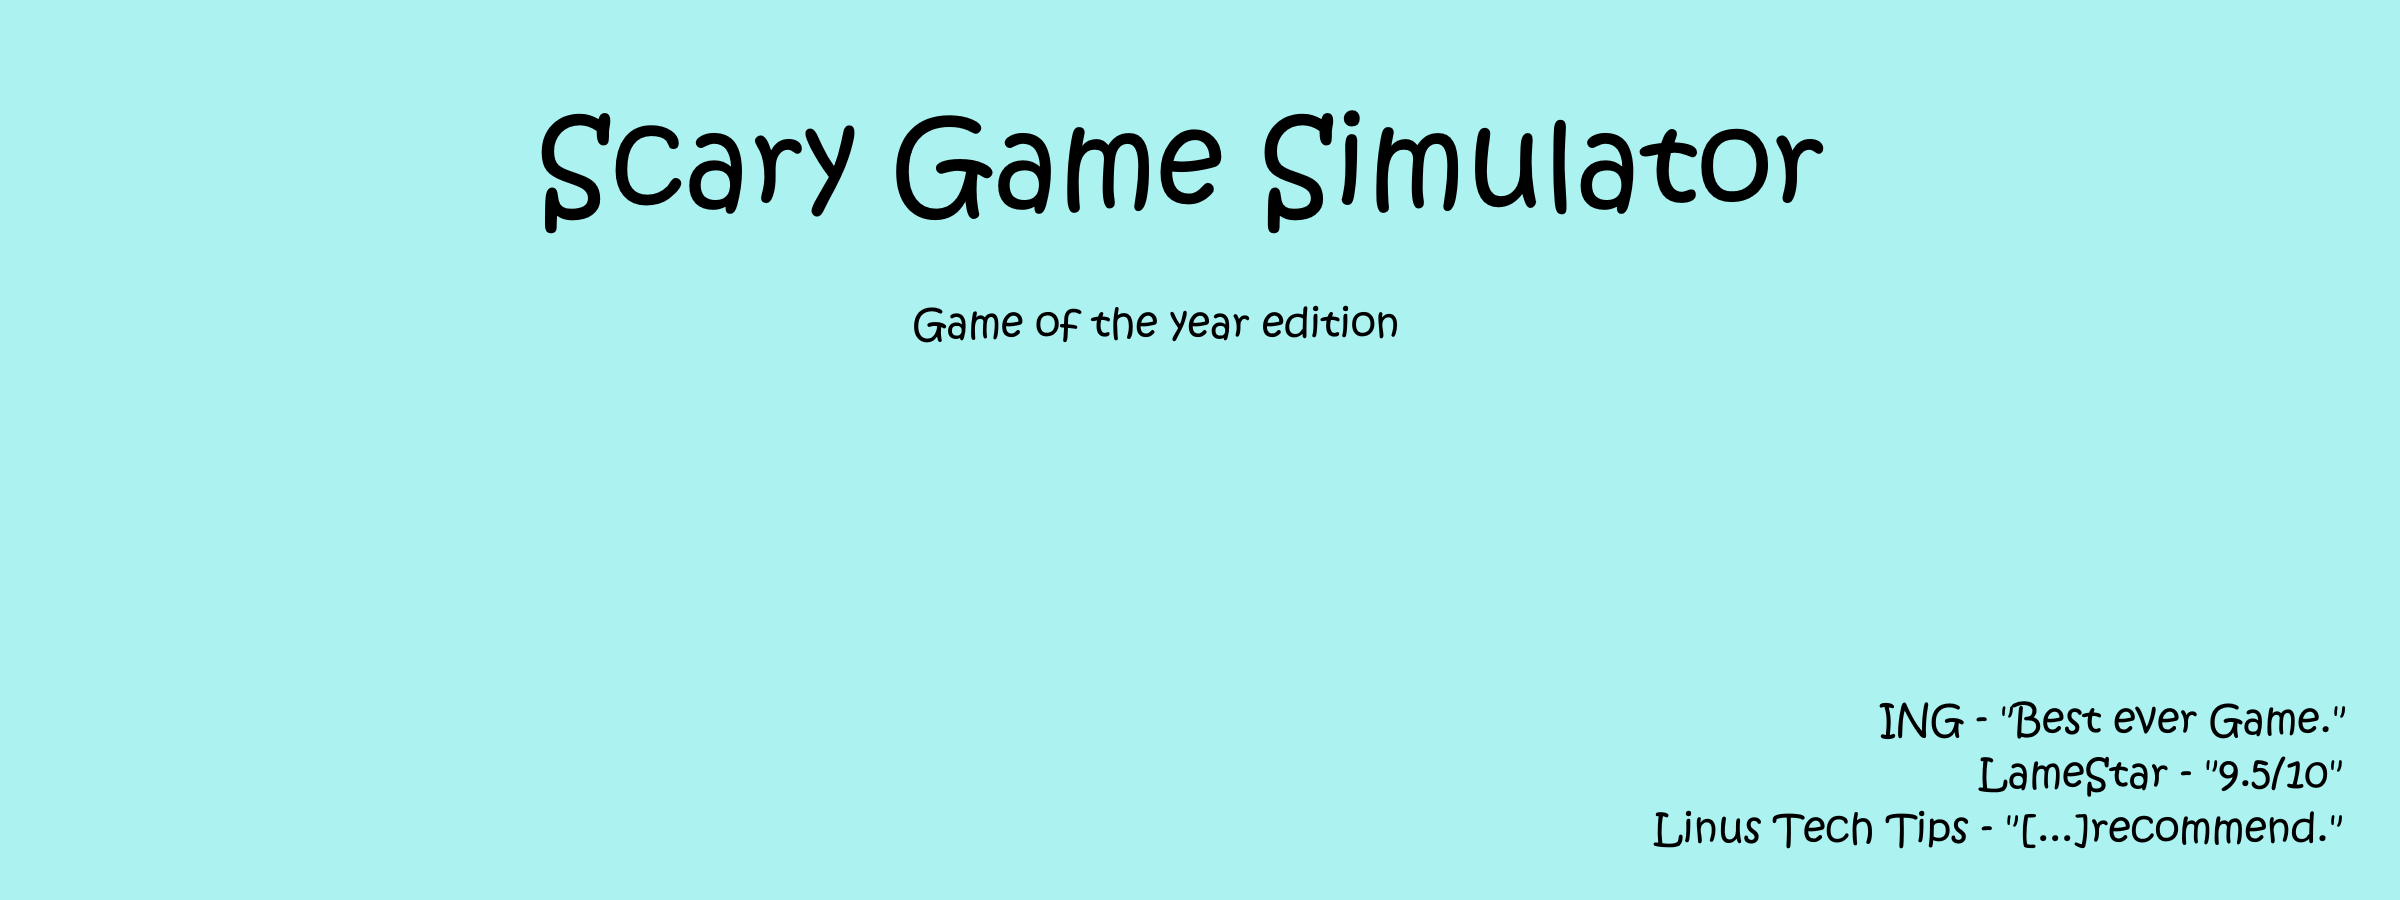 Scary Game Simulator - Game of the year edition